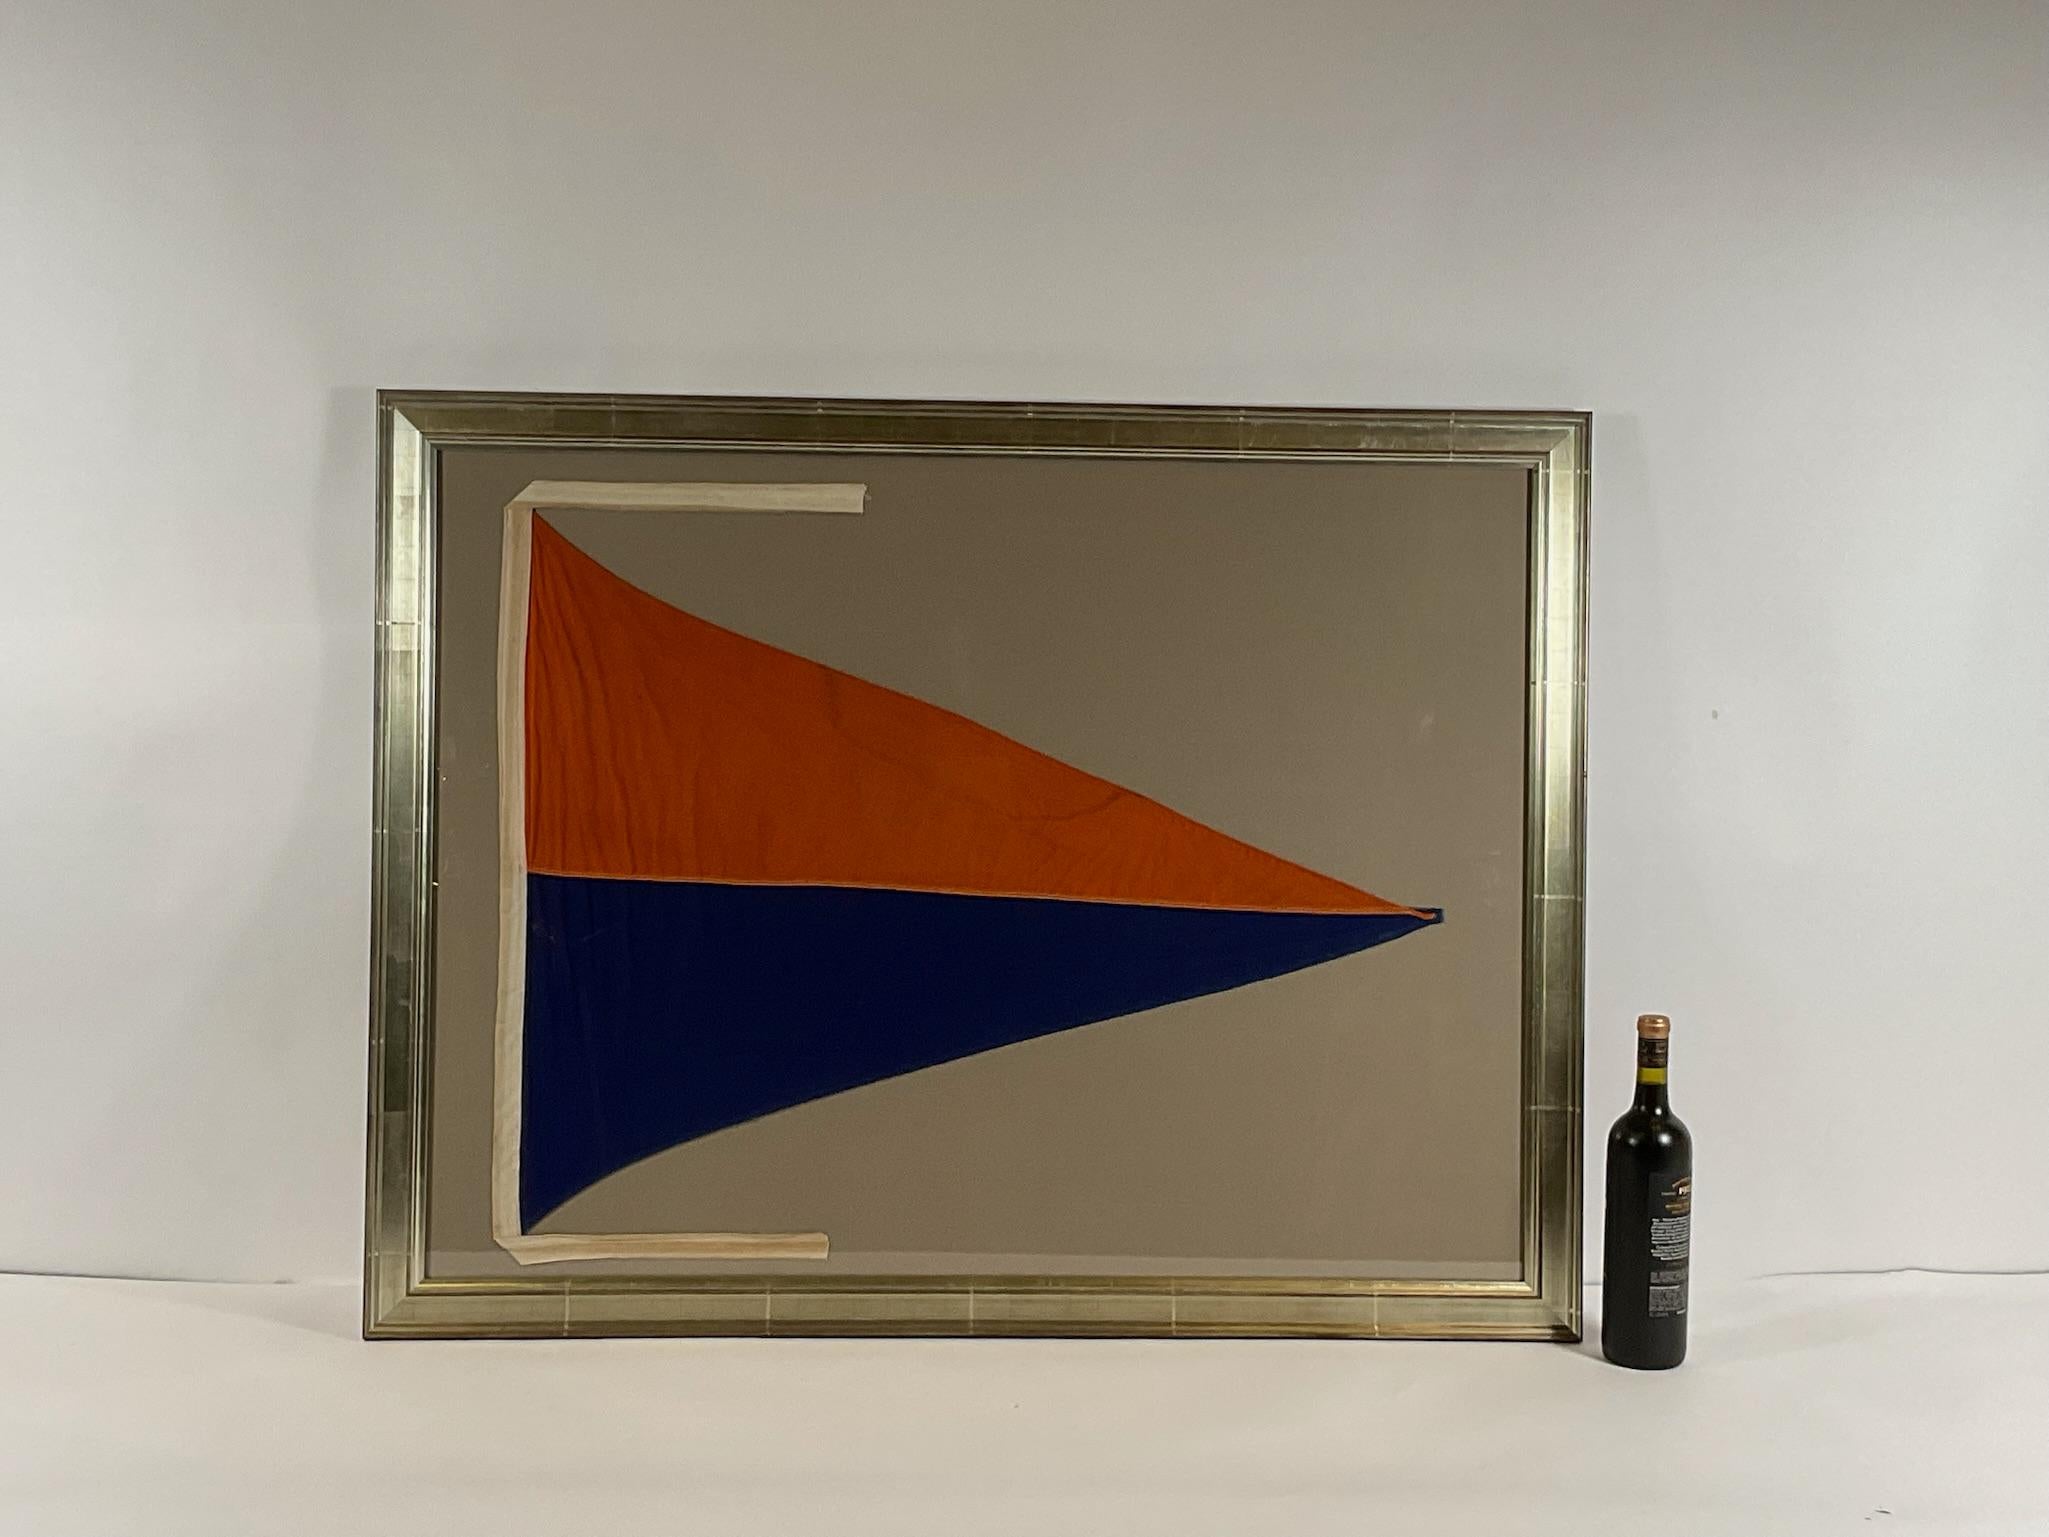 Maritime signal flag in frame showing a large flag stitched in panels of deep orange and blue. With stitched cloth hoist. Large and decorative for the money. Great piece of nautical décor. Circa 1955

Weight: 17 lbs.
Overall Dimensions: 34